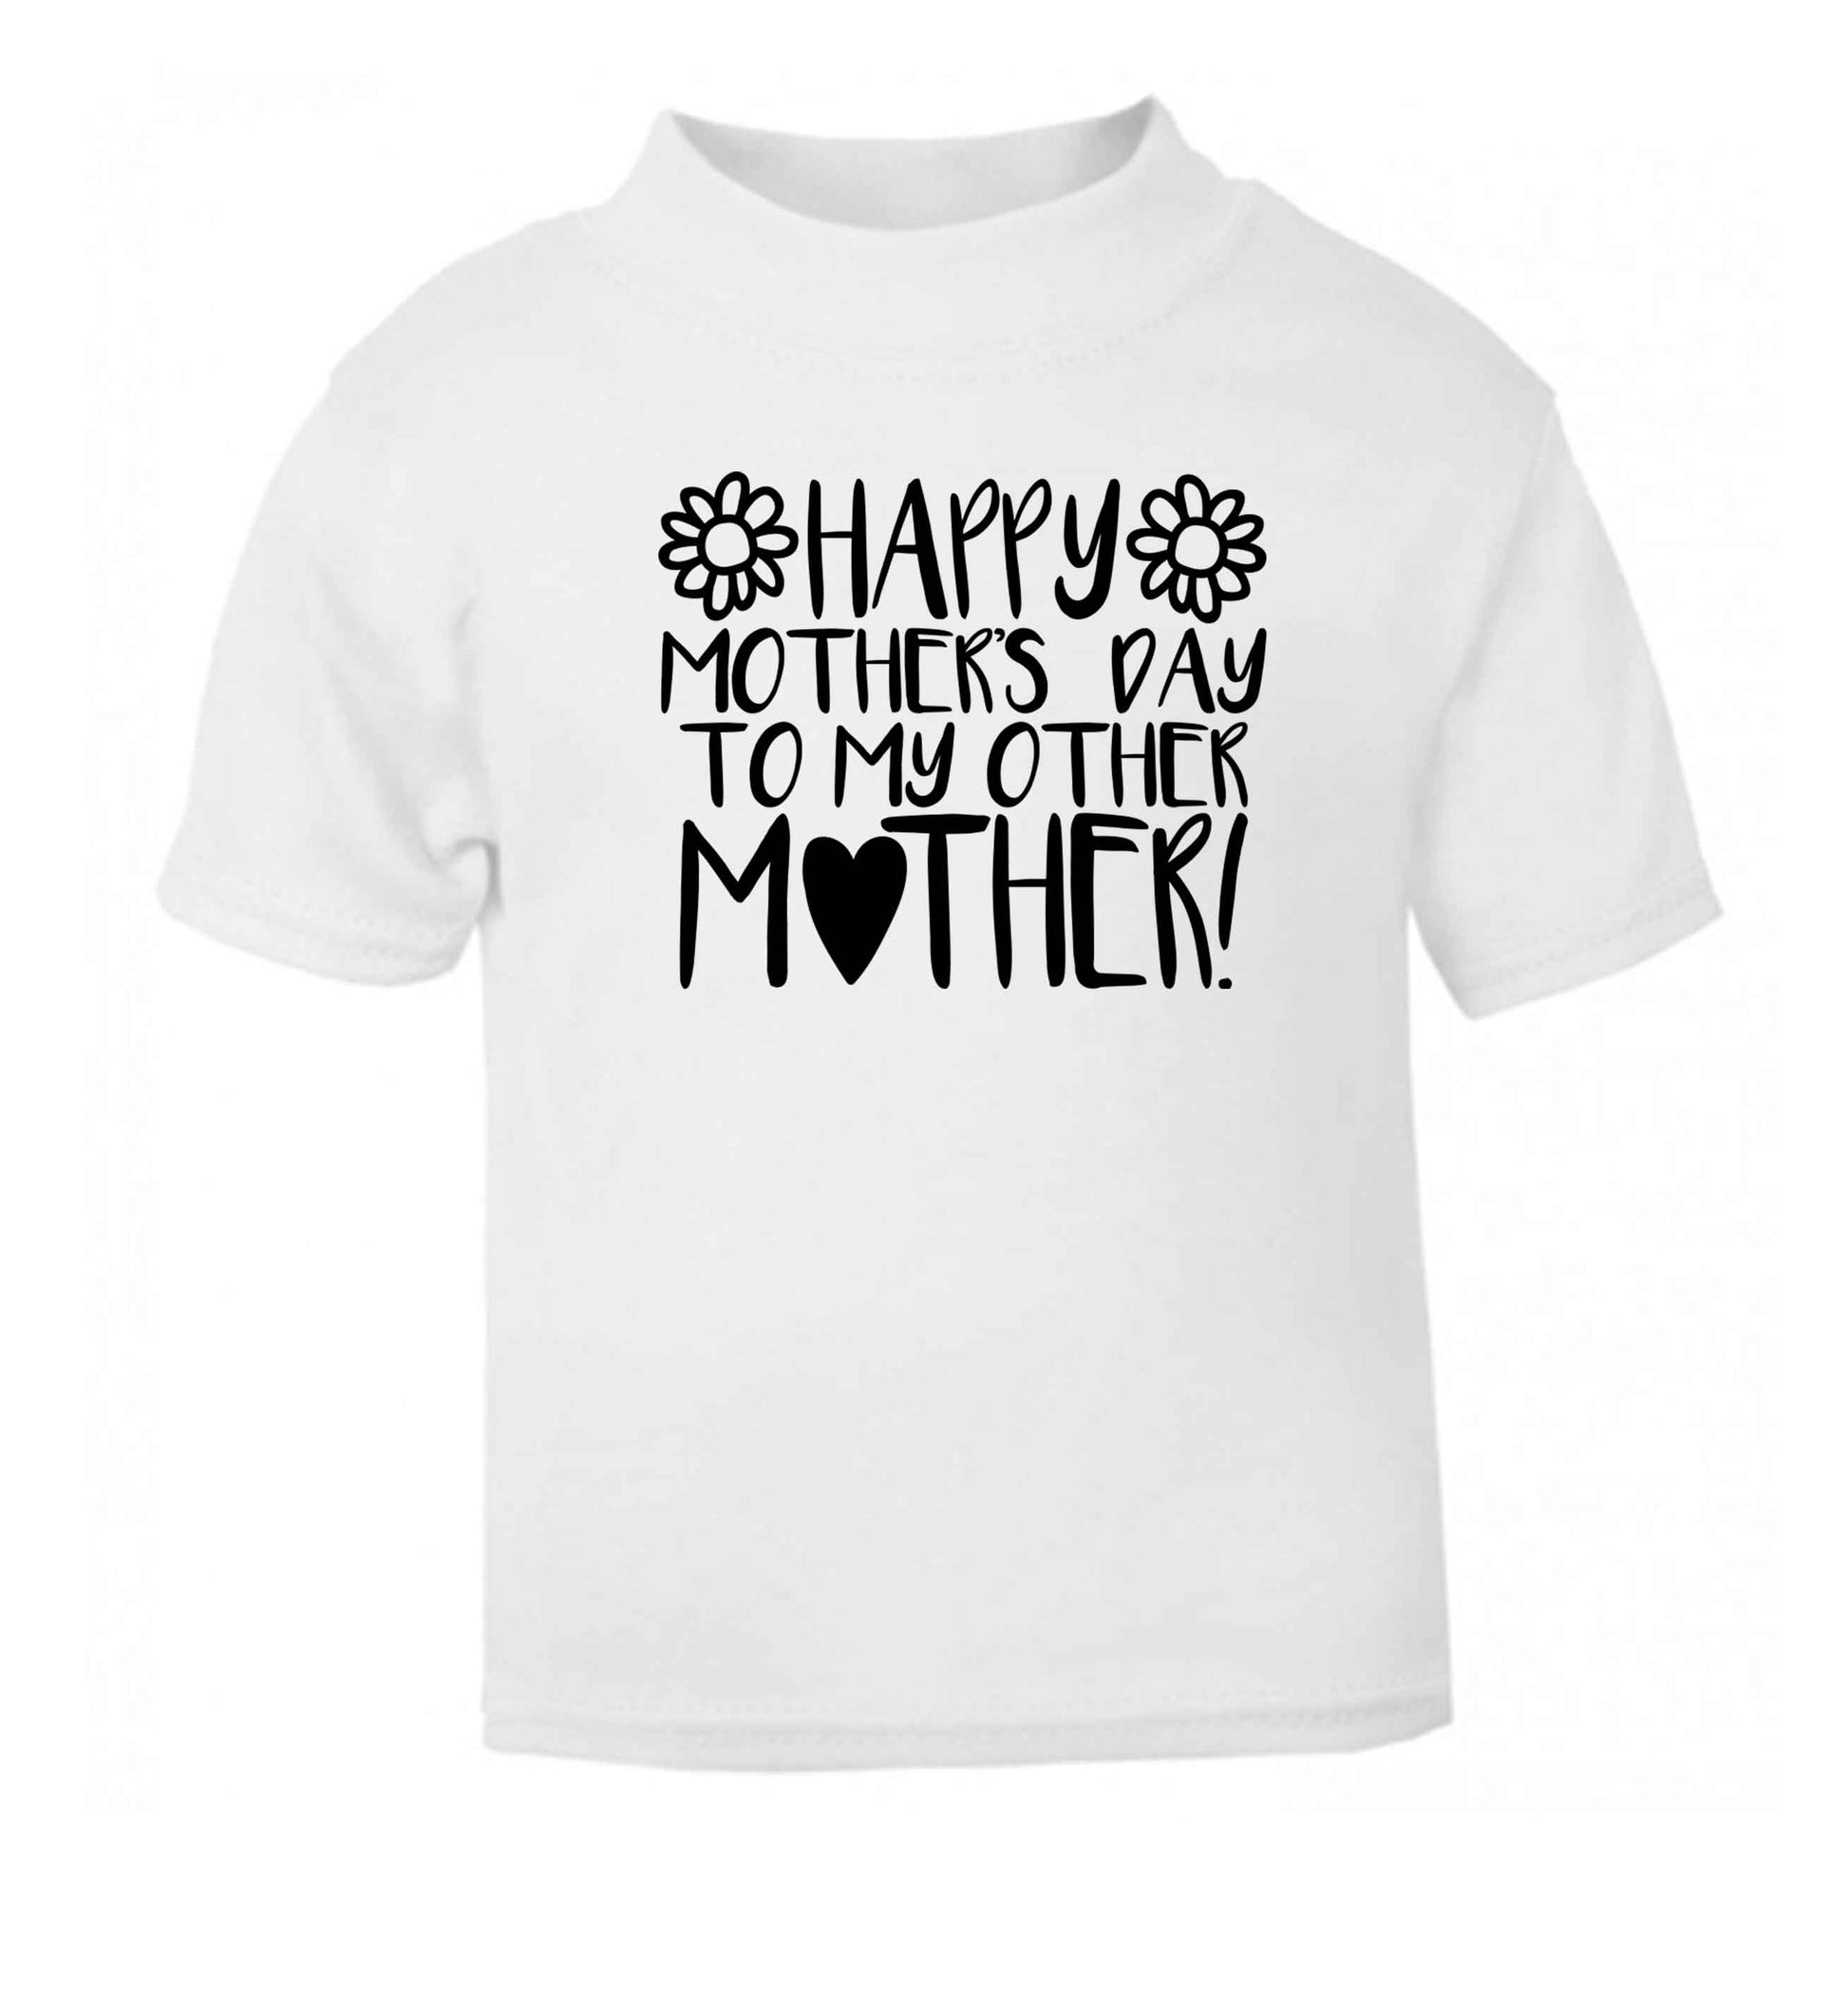 Happy mother's day to my other mother white baby toddler Tshirt 2 Years